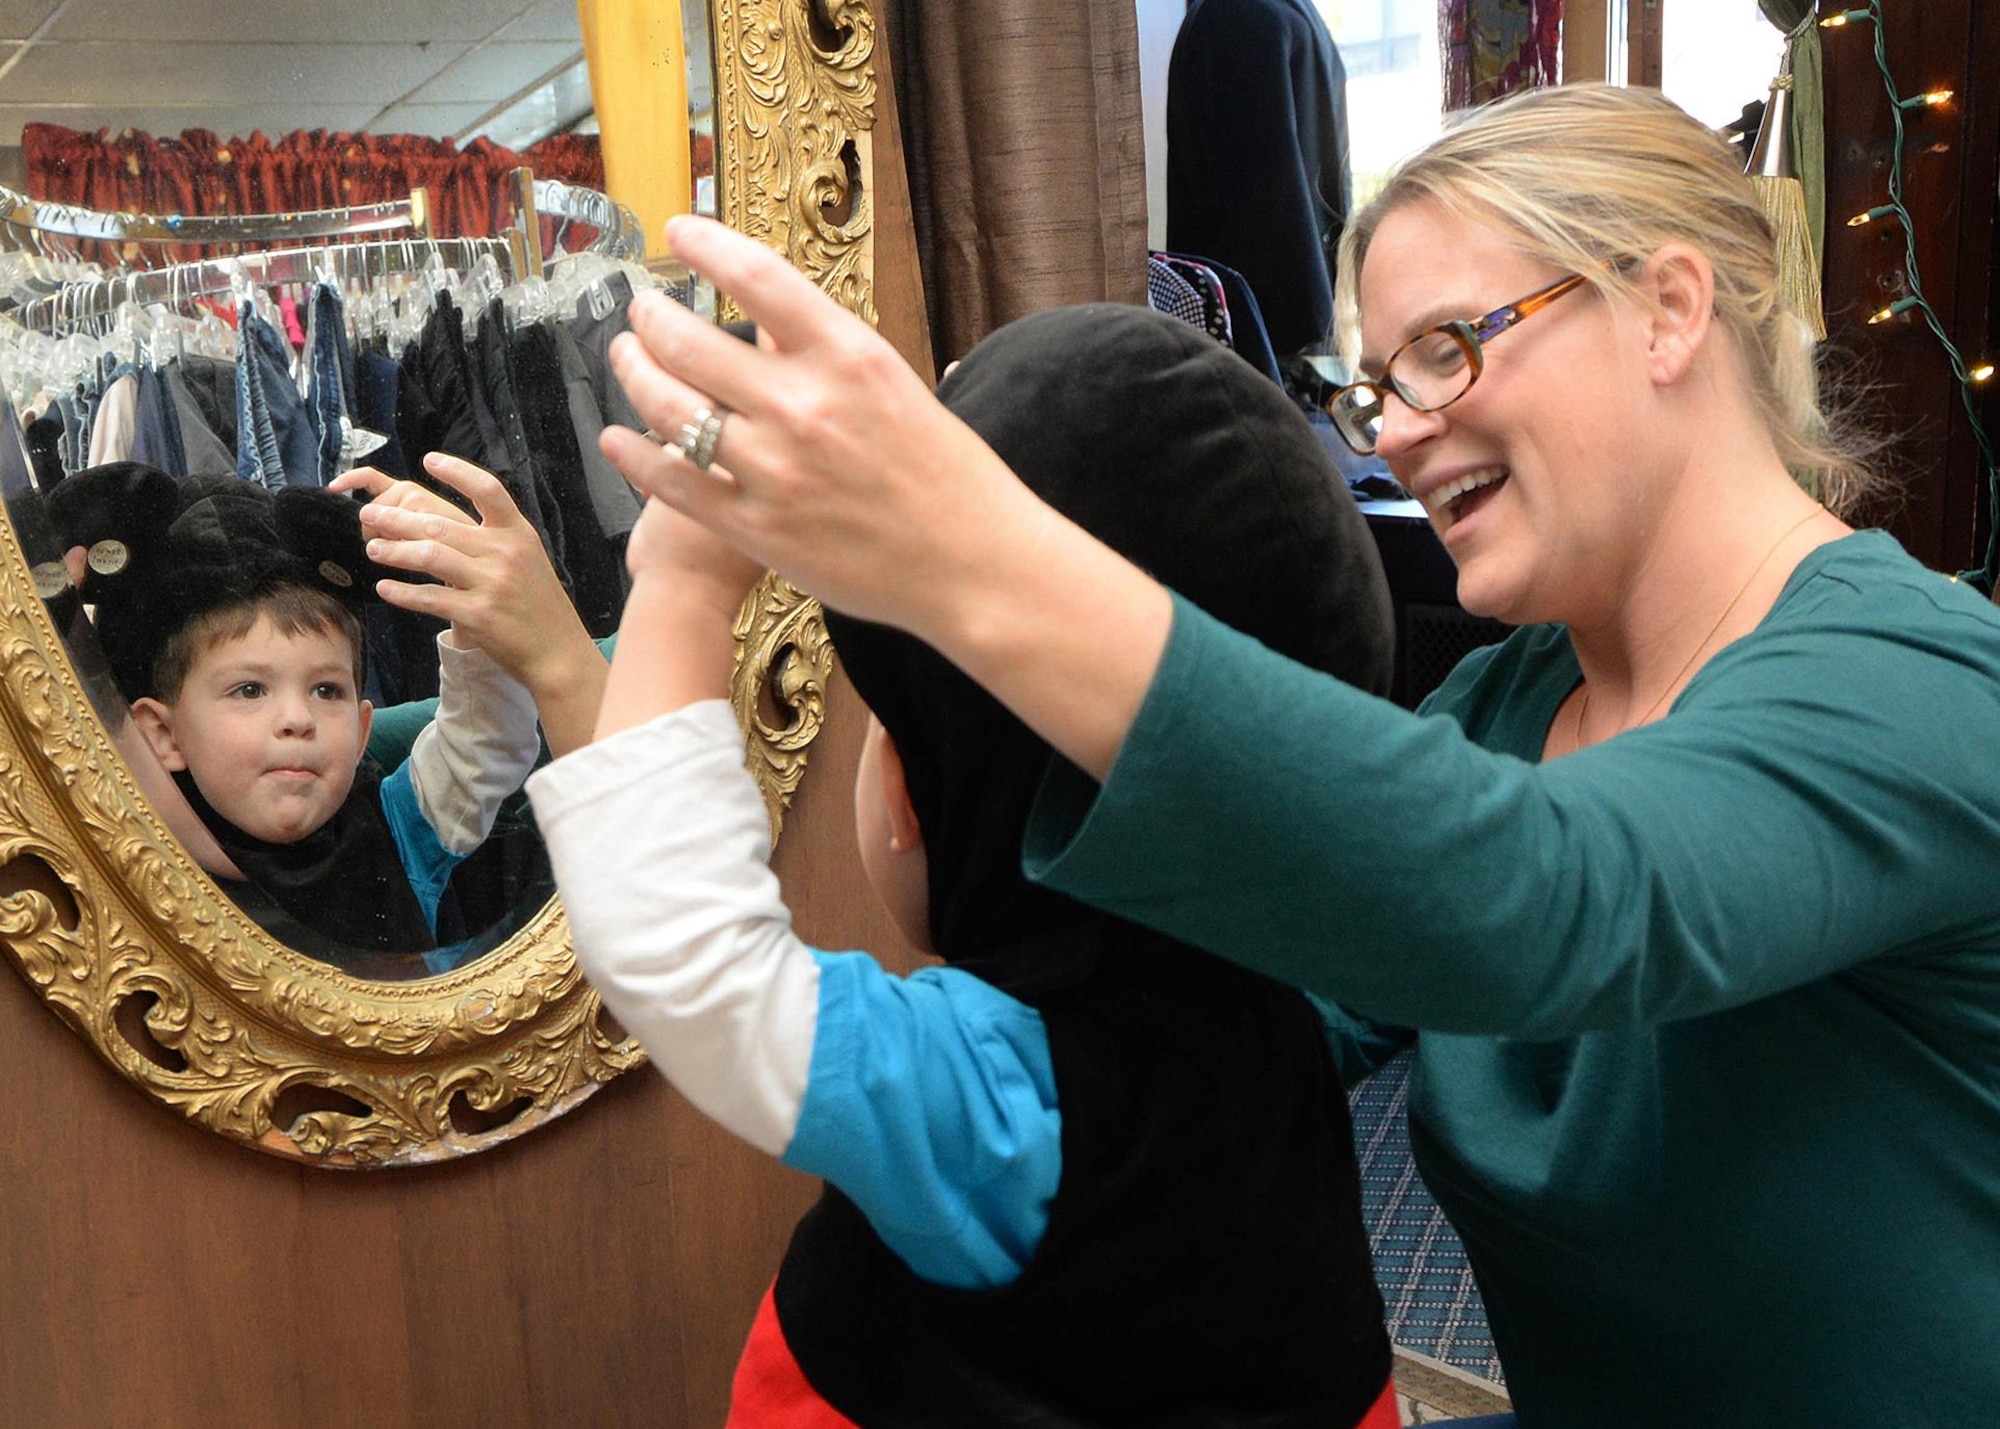 Ashley Chaney helps her son, Marshall, age 2, with trying on a Halloween costume at the Minuteman Thrift Store on base Oct. 11. The thrift store, which is managed by the Hanscom Spouses Club, is open Tuesday and Thursday from 9:30 a.m. to 1:30 p.m., as well as the first Saturday of month from 9:30 a.m. to 1:30 p.m. (U.S. Air Force photo by Linda LaBonte Britt)